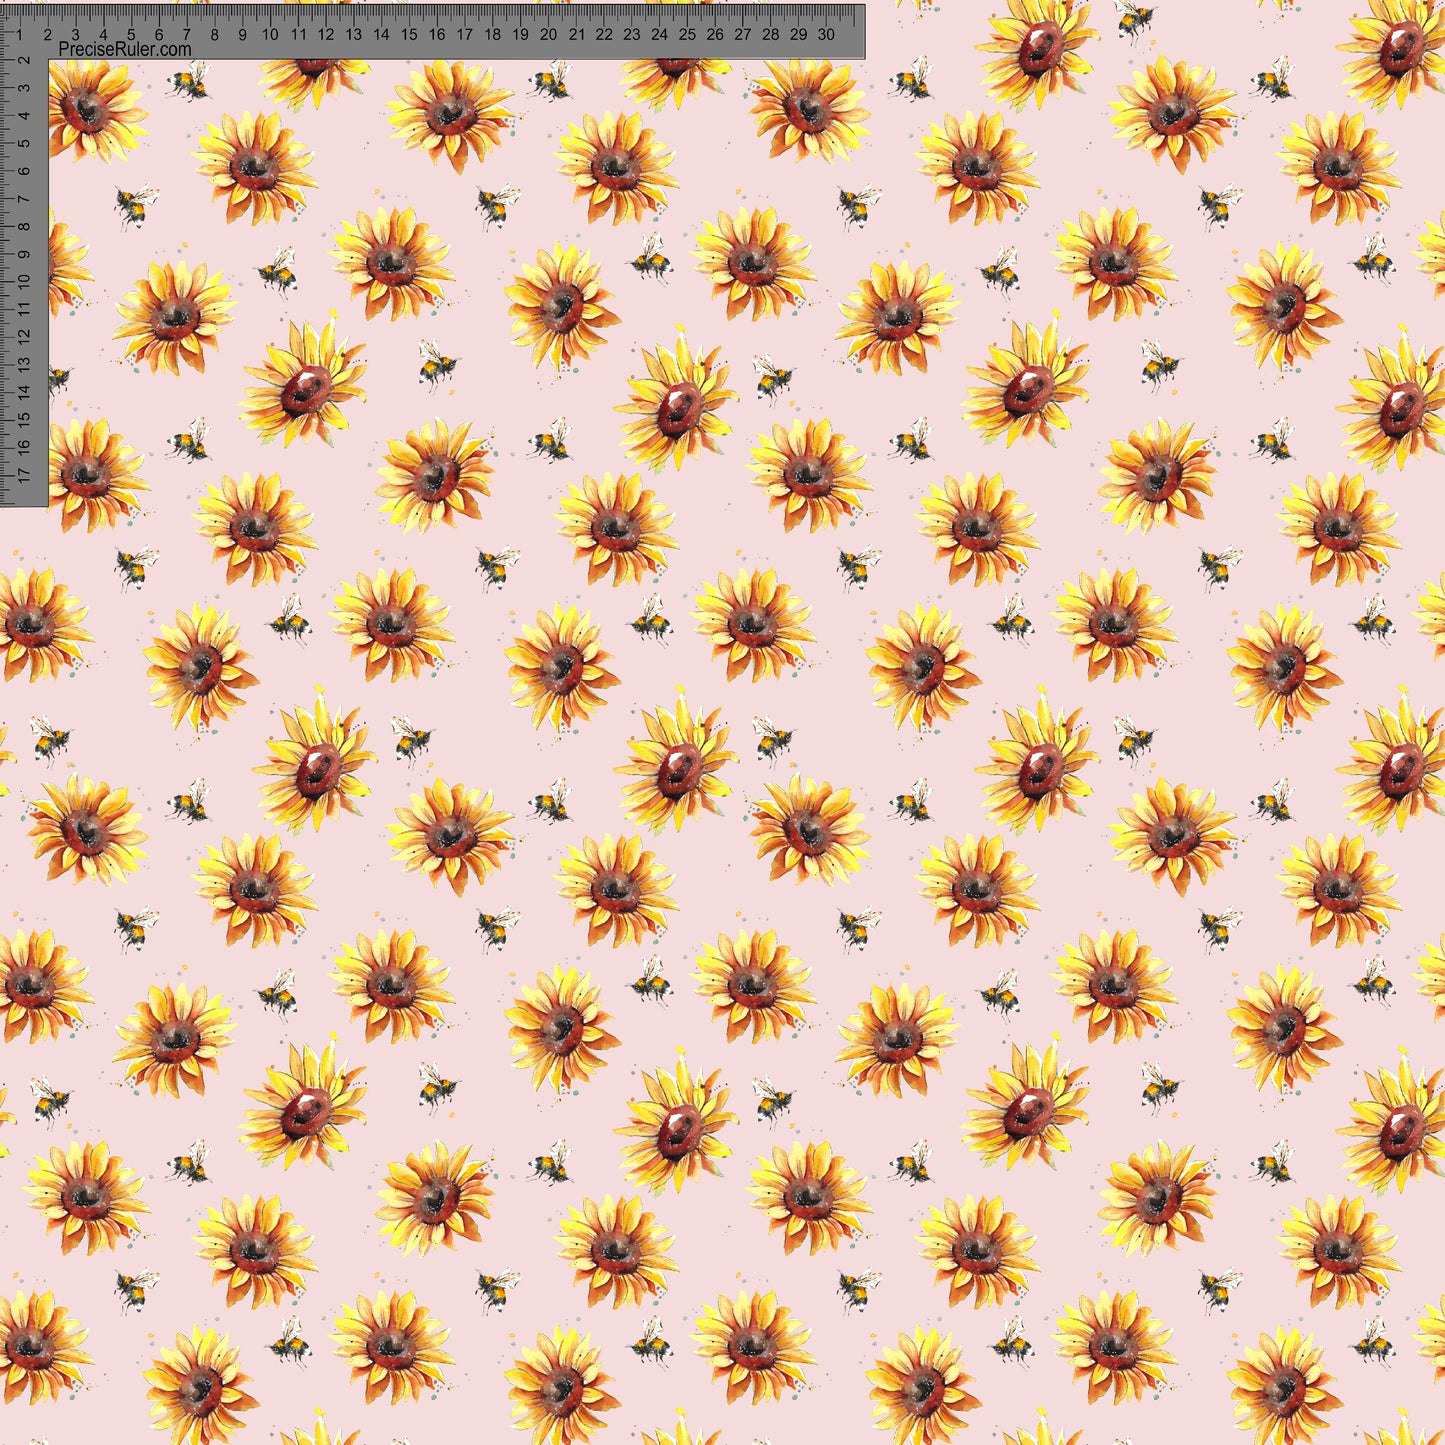 Load image into Gallery viewer, Sunflowers and bees on Peachy Pink- Fiona Clarke Design- Custom Pre Order
